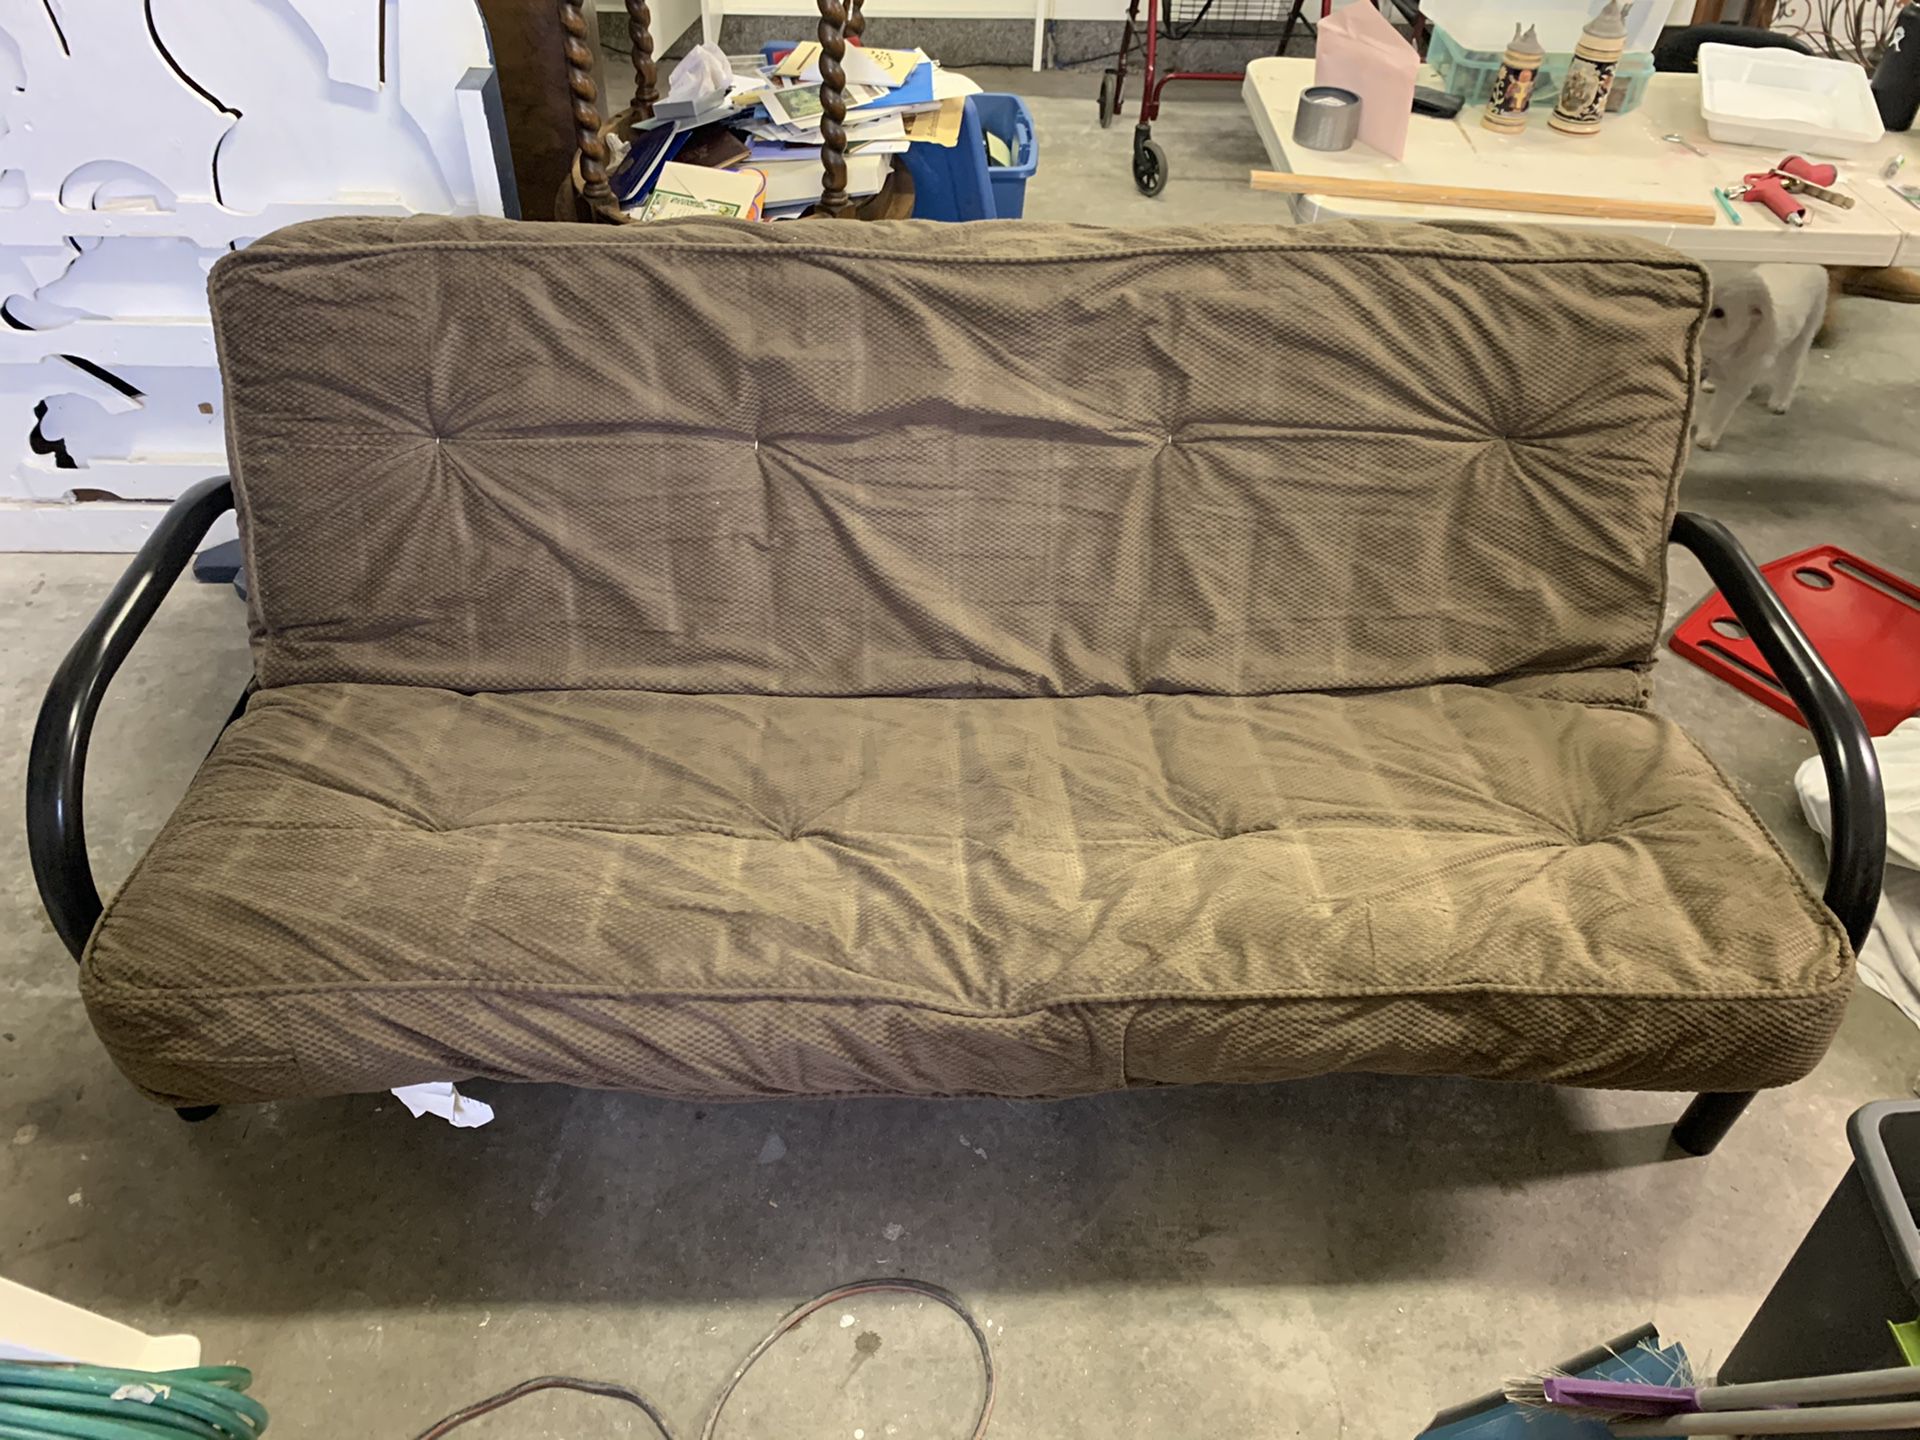 Futon. A couch and also turns into a bed. Couple scratches but works great!